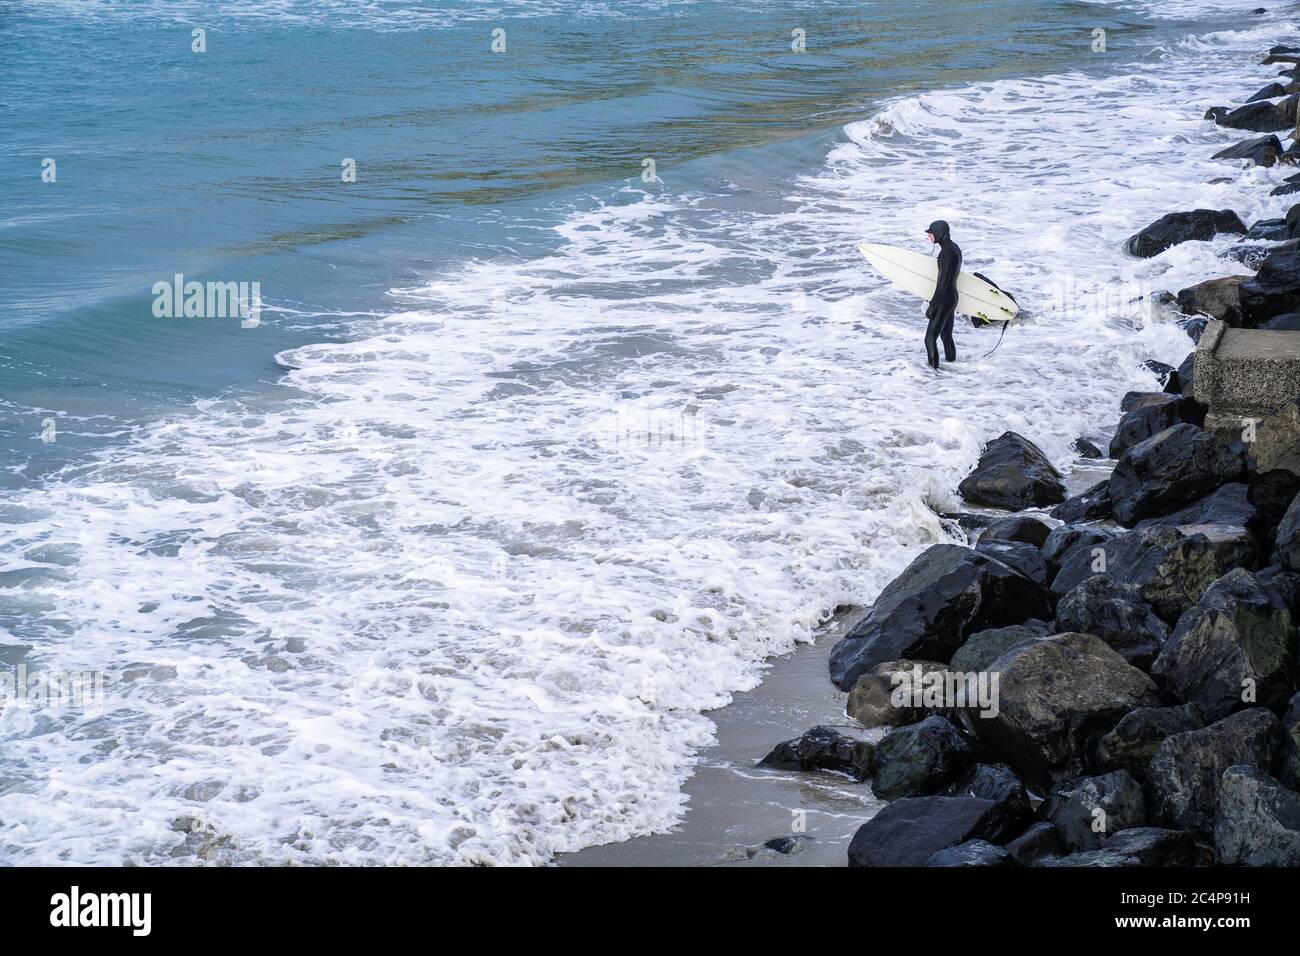 Surfer wearing wetsuit with surfboard watching ocean waves crash over rocks at St. Clair beach, Dunedin, New Zealand. Stock Photo